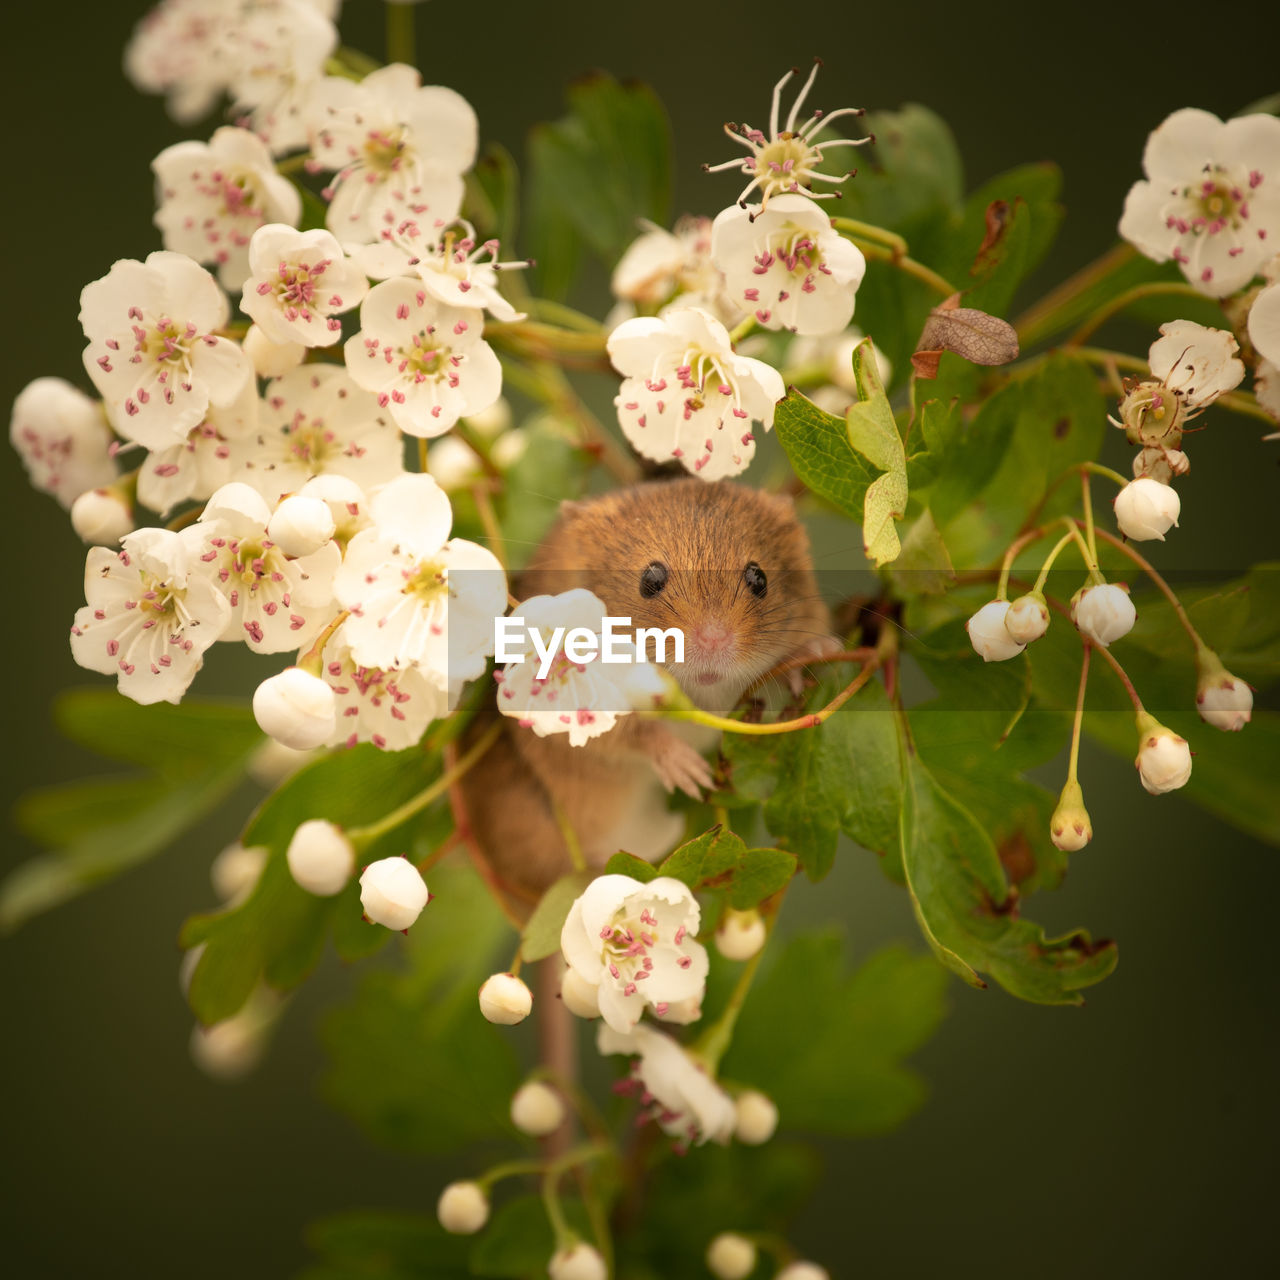 Harvest mouse perched on flowers